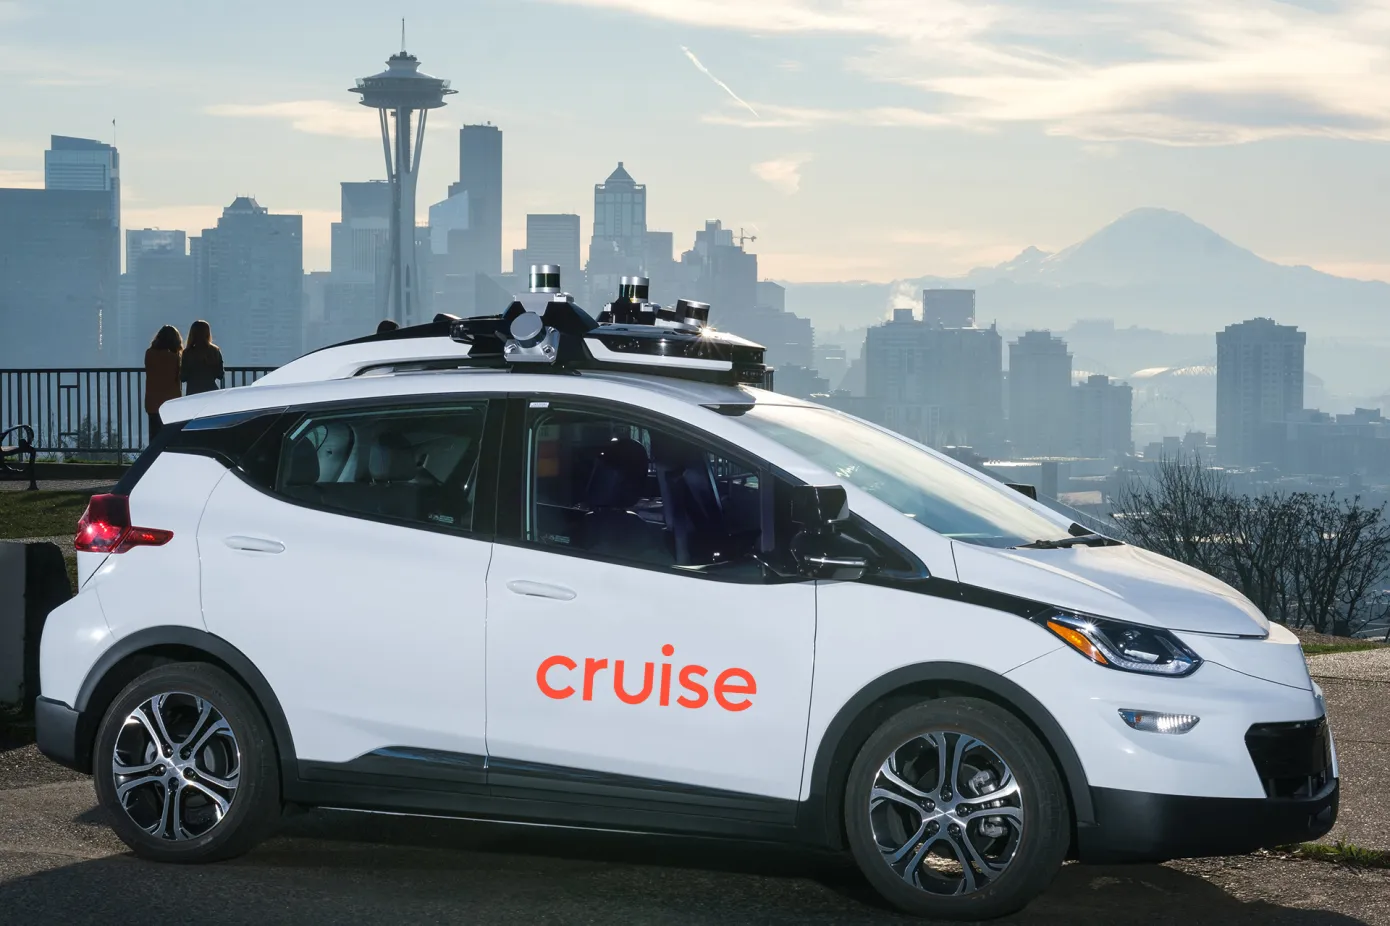 Cruise plans to roll out robotaxi service in Seattle and Washington, DC